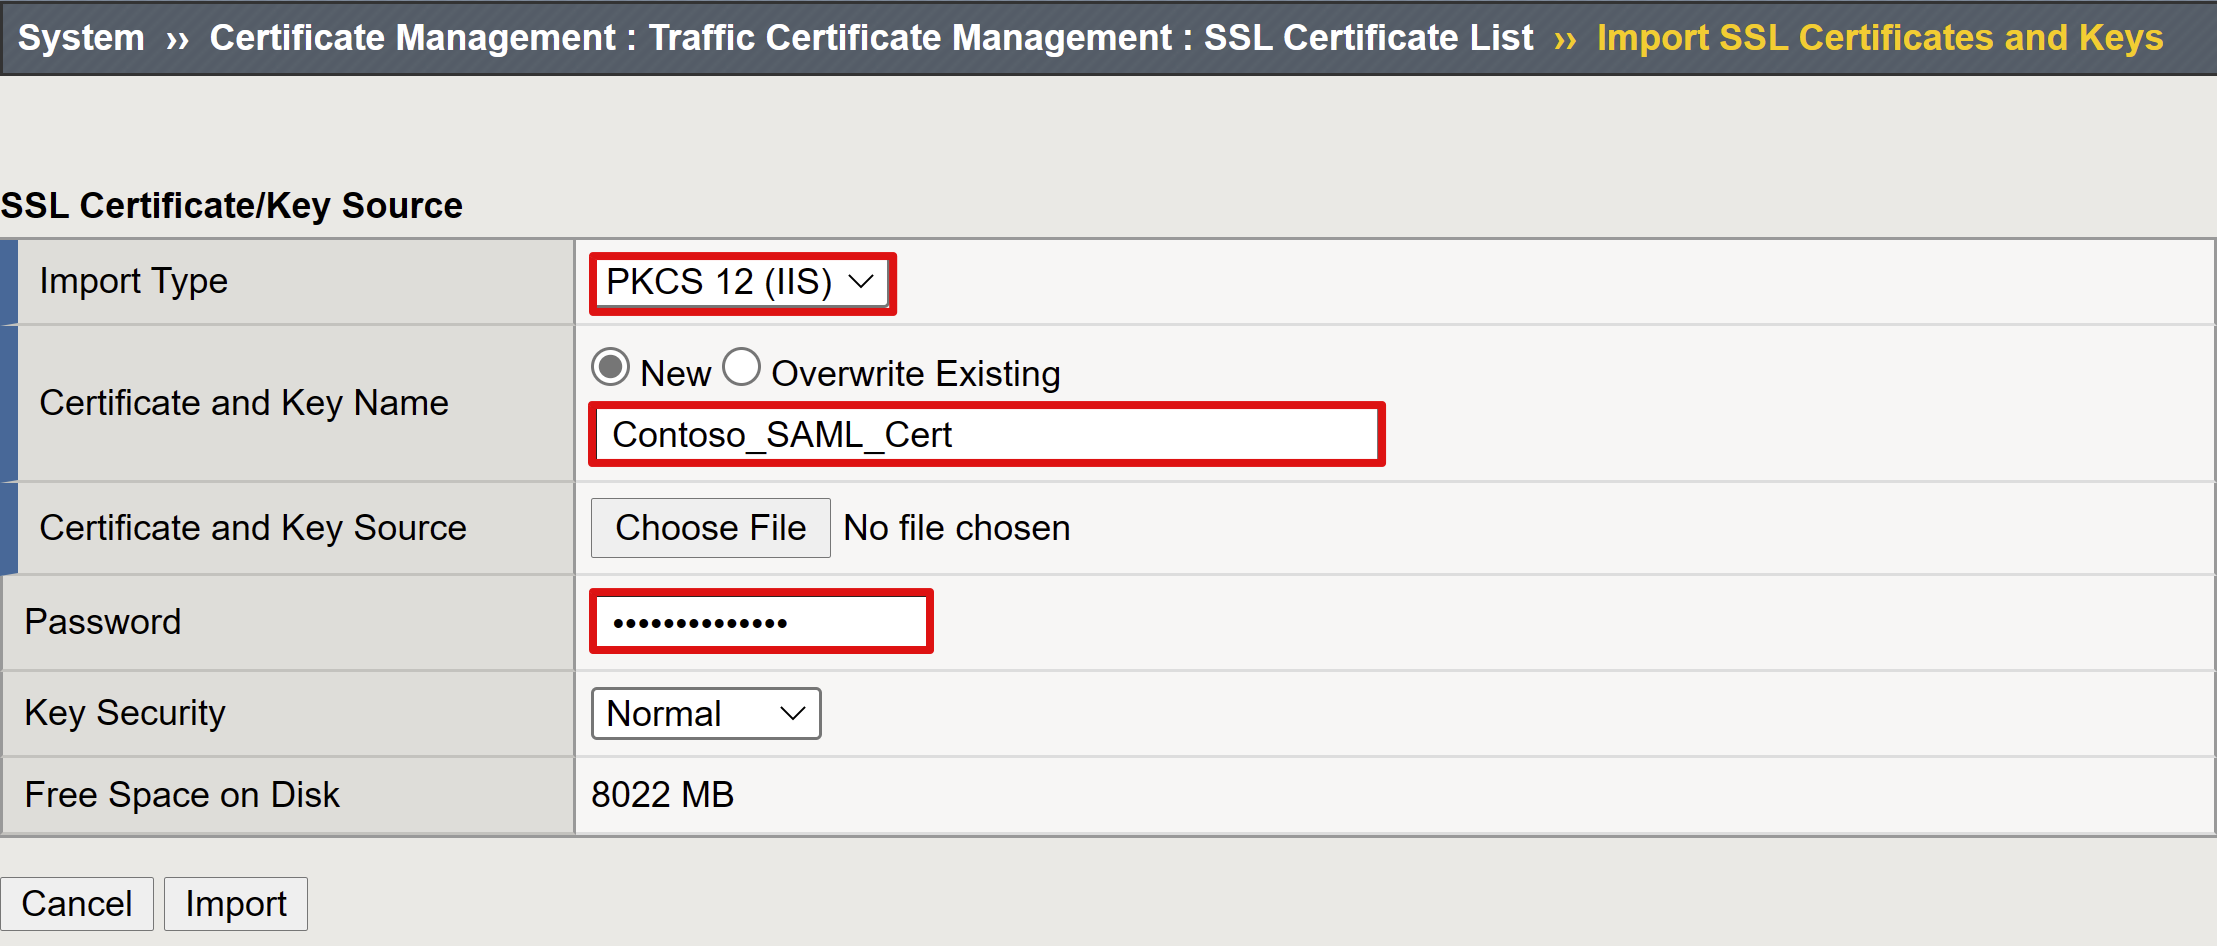 Screenshot of options and selections for SSL Certificate and Key Source